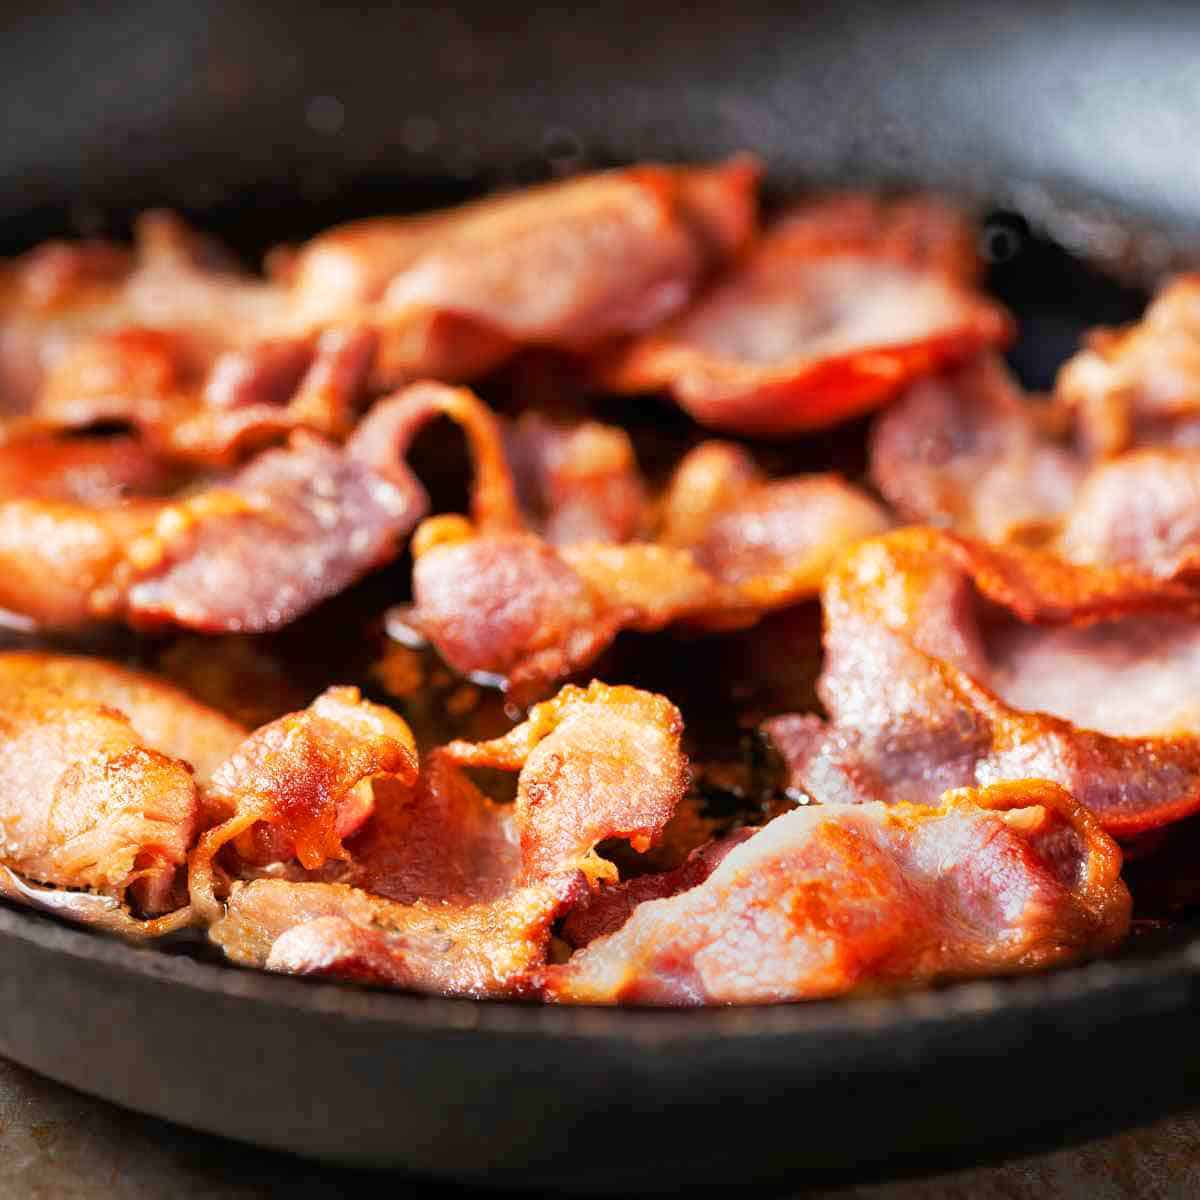 A pound of back bacon slices frying in a cast iron skillet.